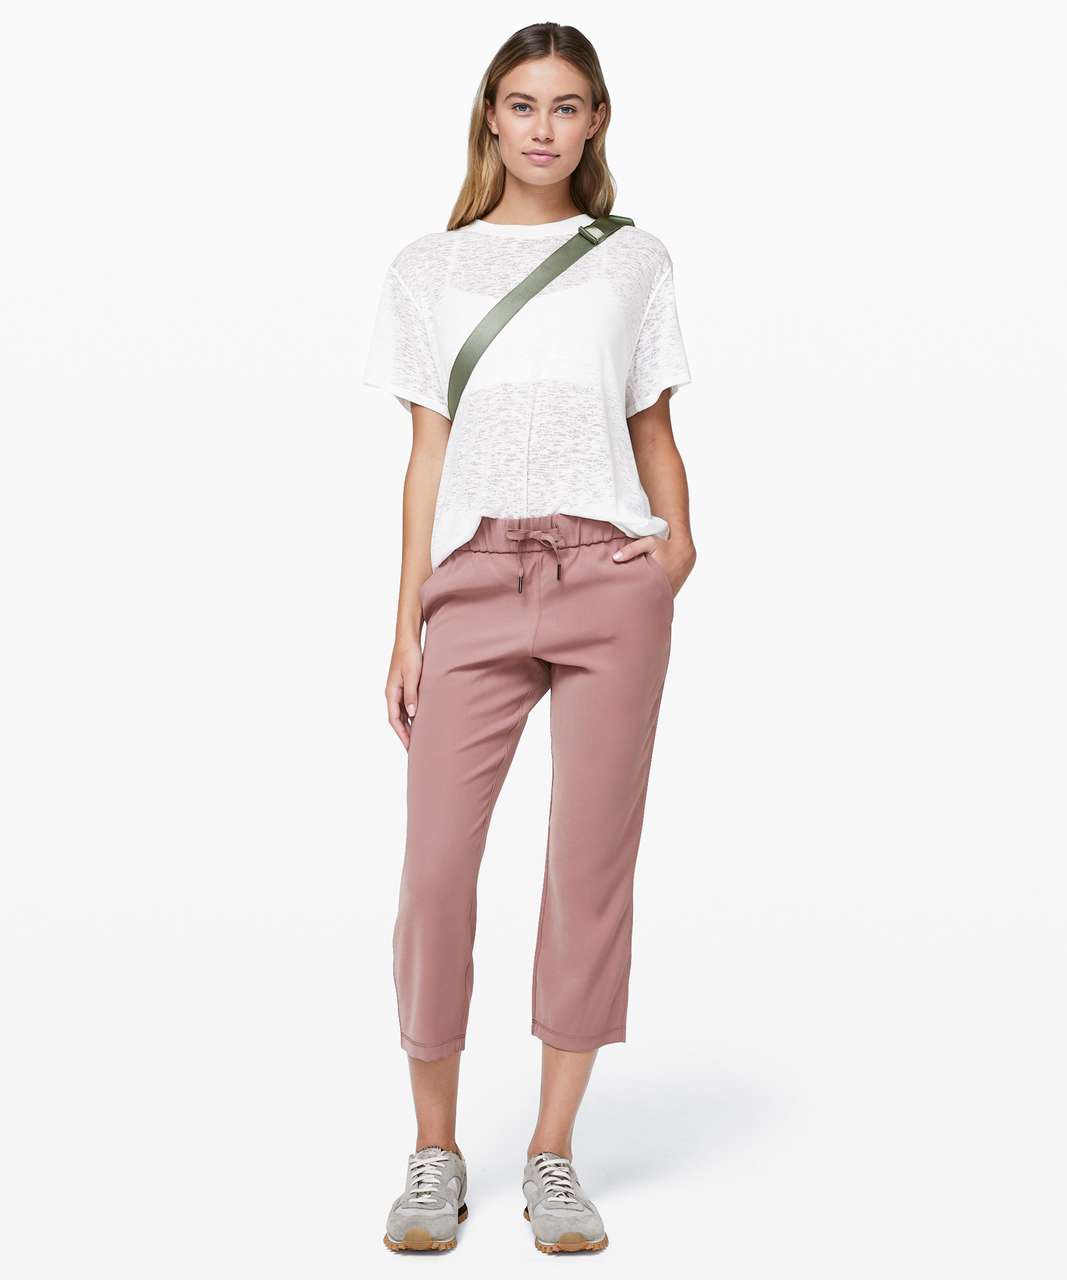 Lululemon On the Fly Crop *Woven 23